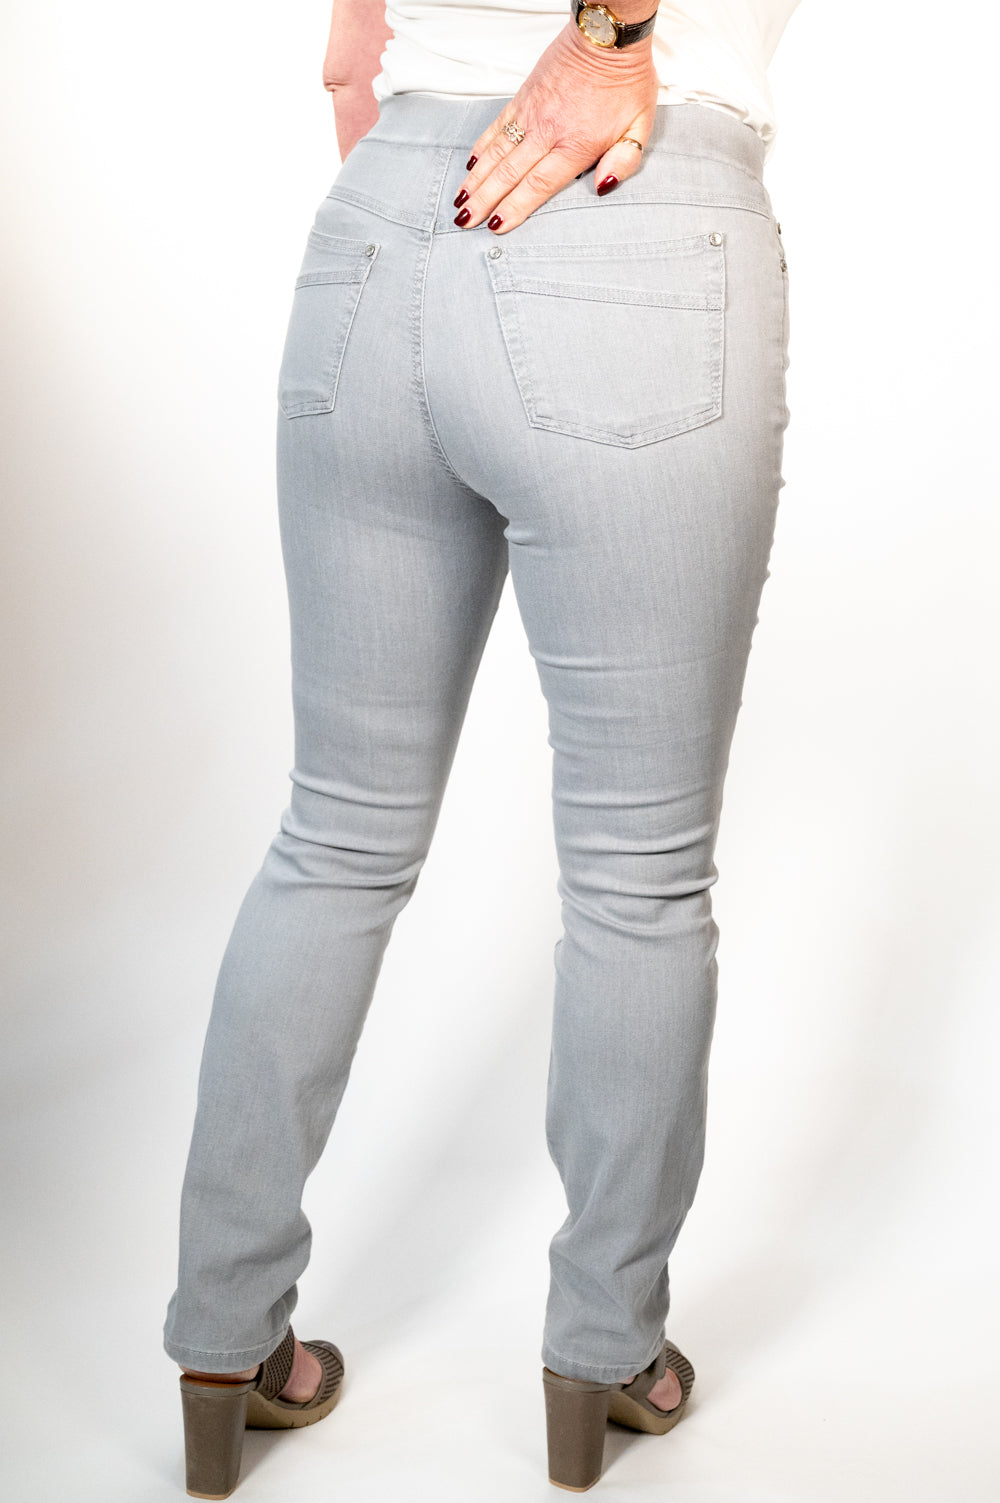 Anna Montana Jump In Jeans - Silver 1001